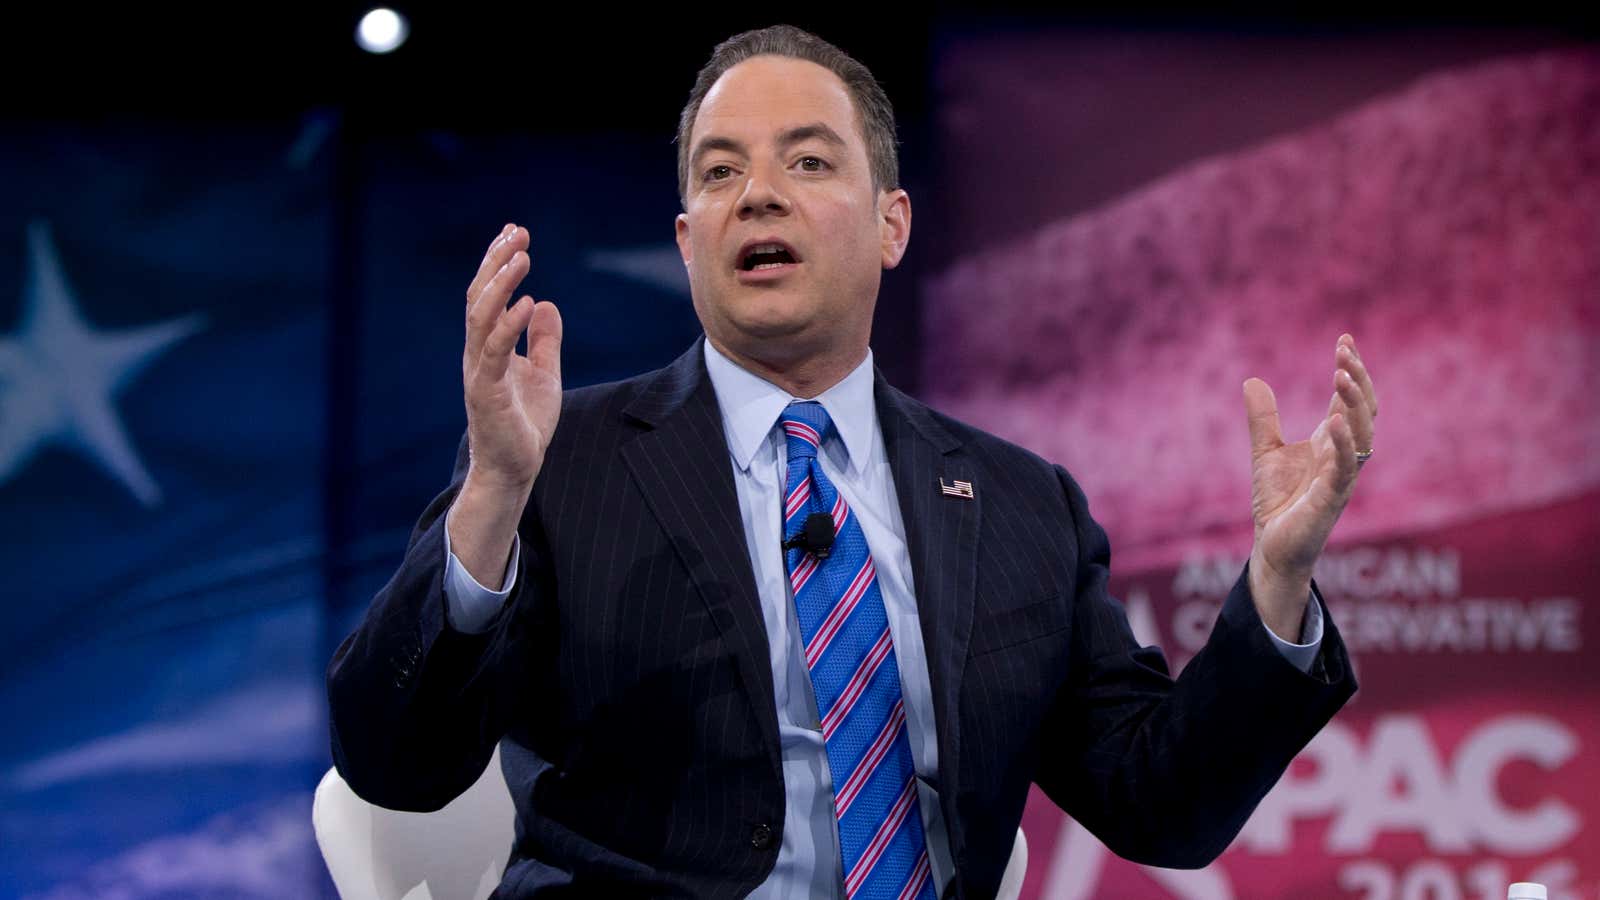 “He’s trying.” – Reince Priebus on Donald Trump.